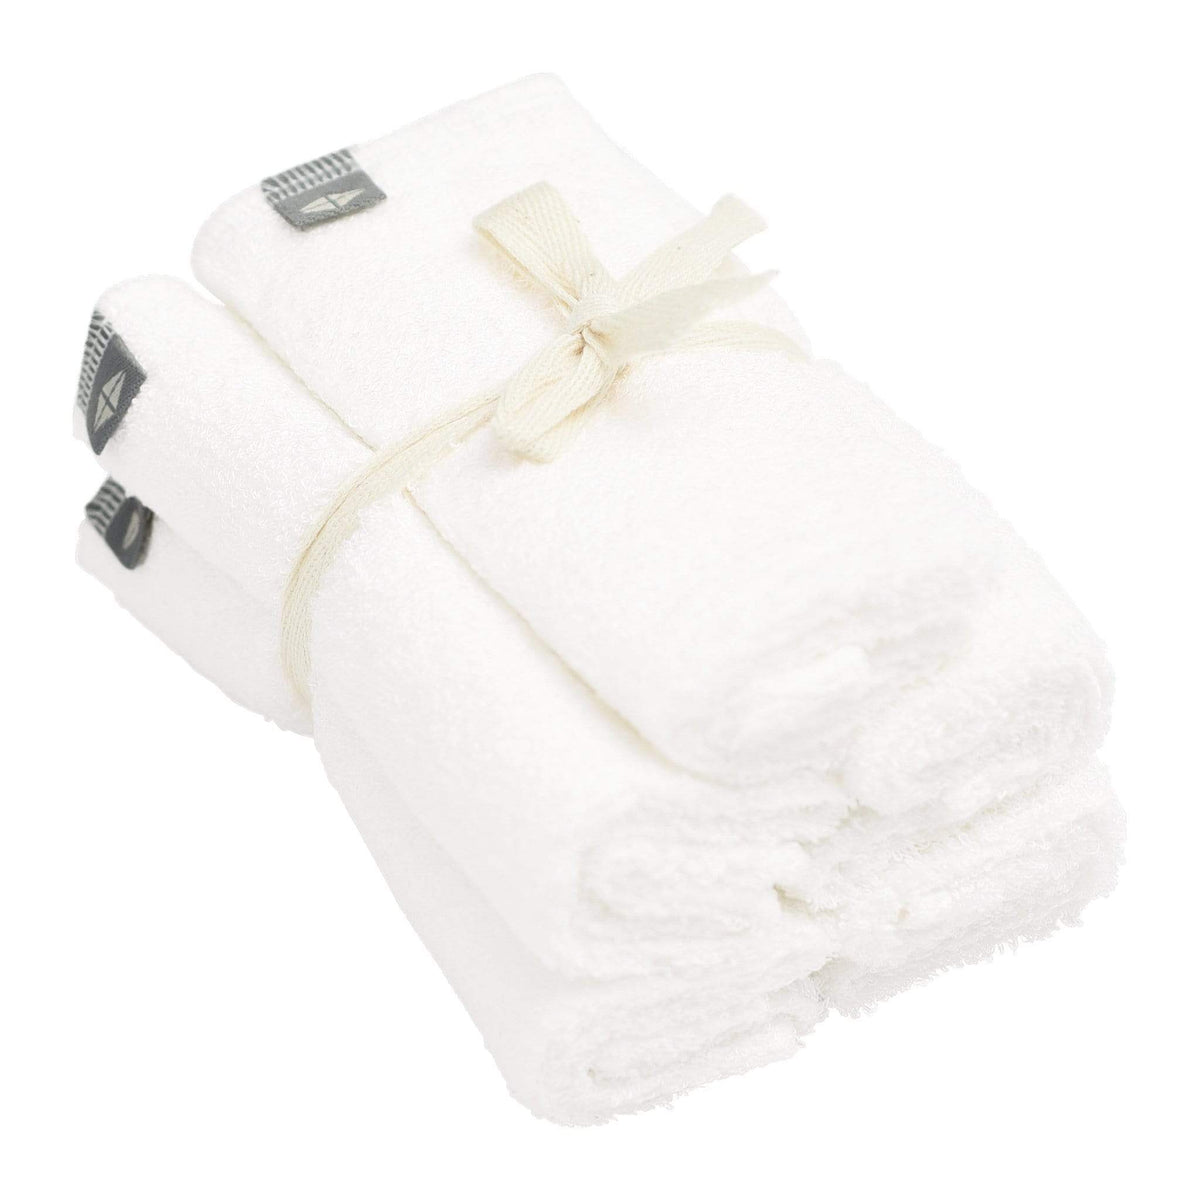 https://cdn.shopify.com/s/files/1/0019/7106/0847/products/kyte-baby-terry-washcloths-cloud-os-terry-washcloth-5-pack-in-cloud-28160568098927_1200x.jpg?v=1620263672